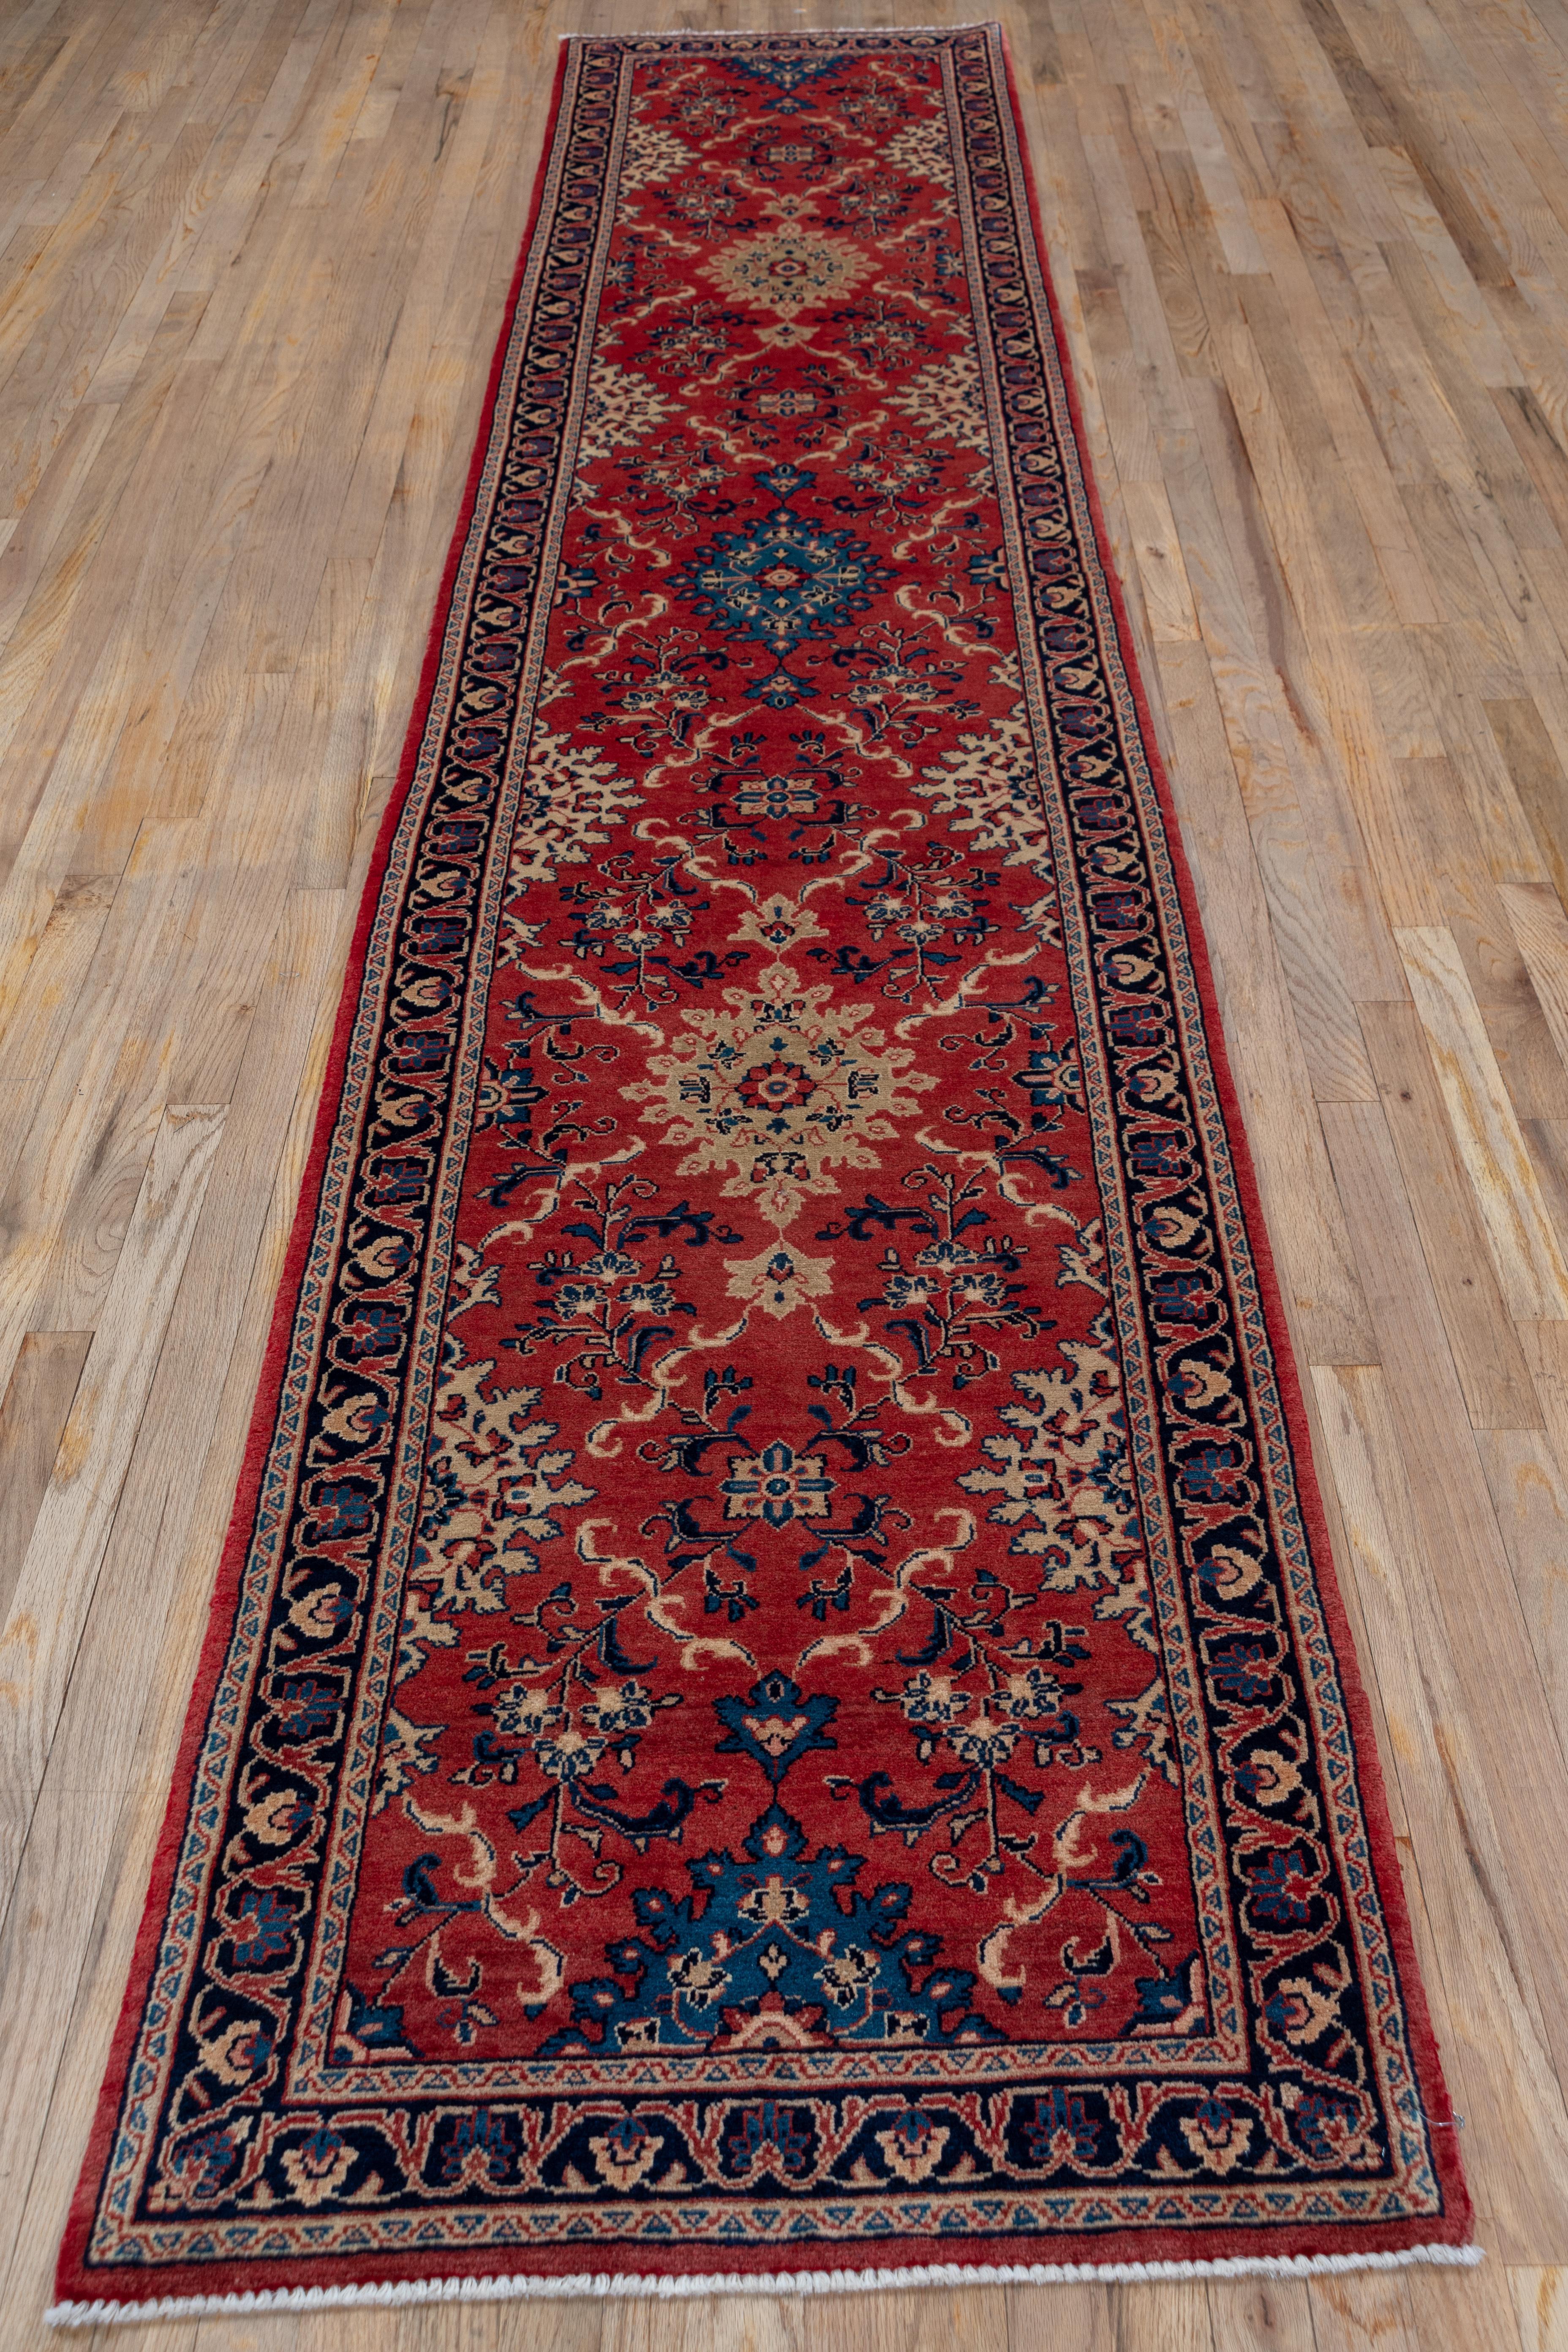 The red ground is decorated by long flowering tendrils, leafy lozenges and small octogrammes, all in sand, navy, beige and teal. The navy border fits palmettes into a split arabesque pattern. The condition is excellent as befits this semi-antique